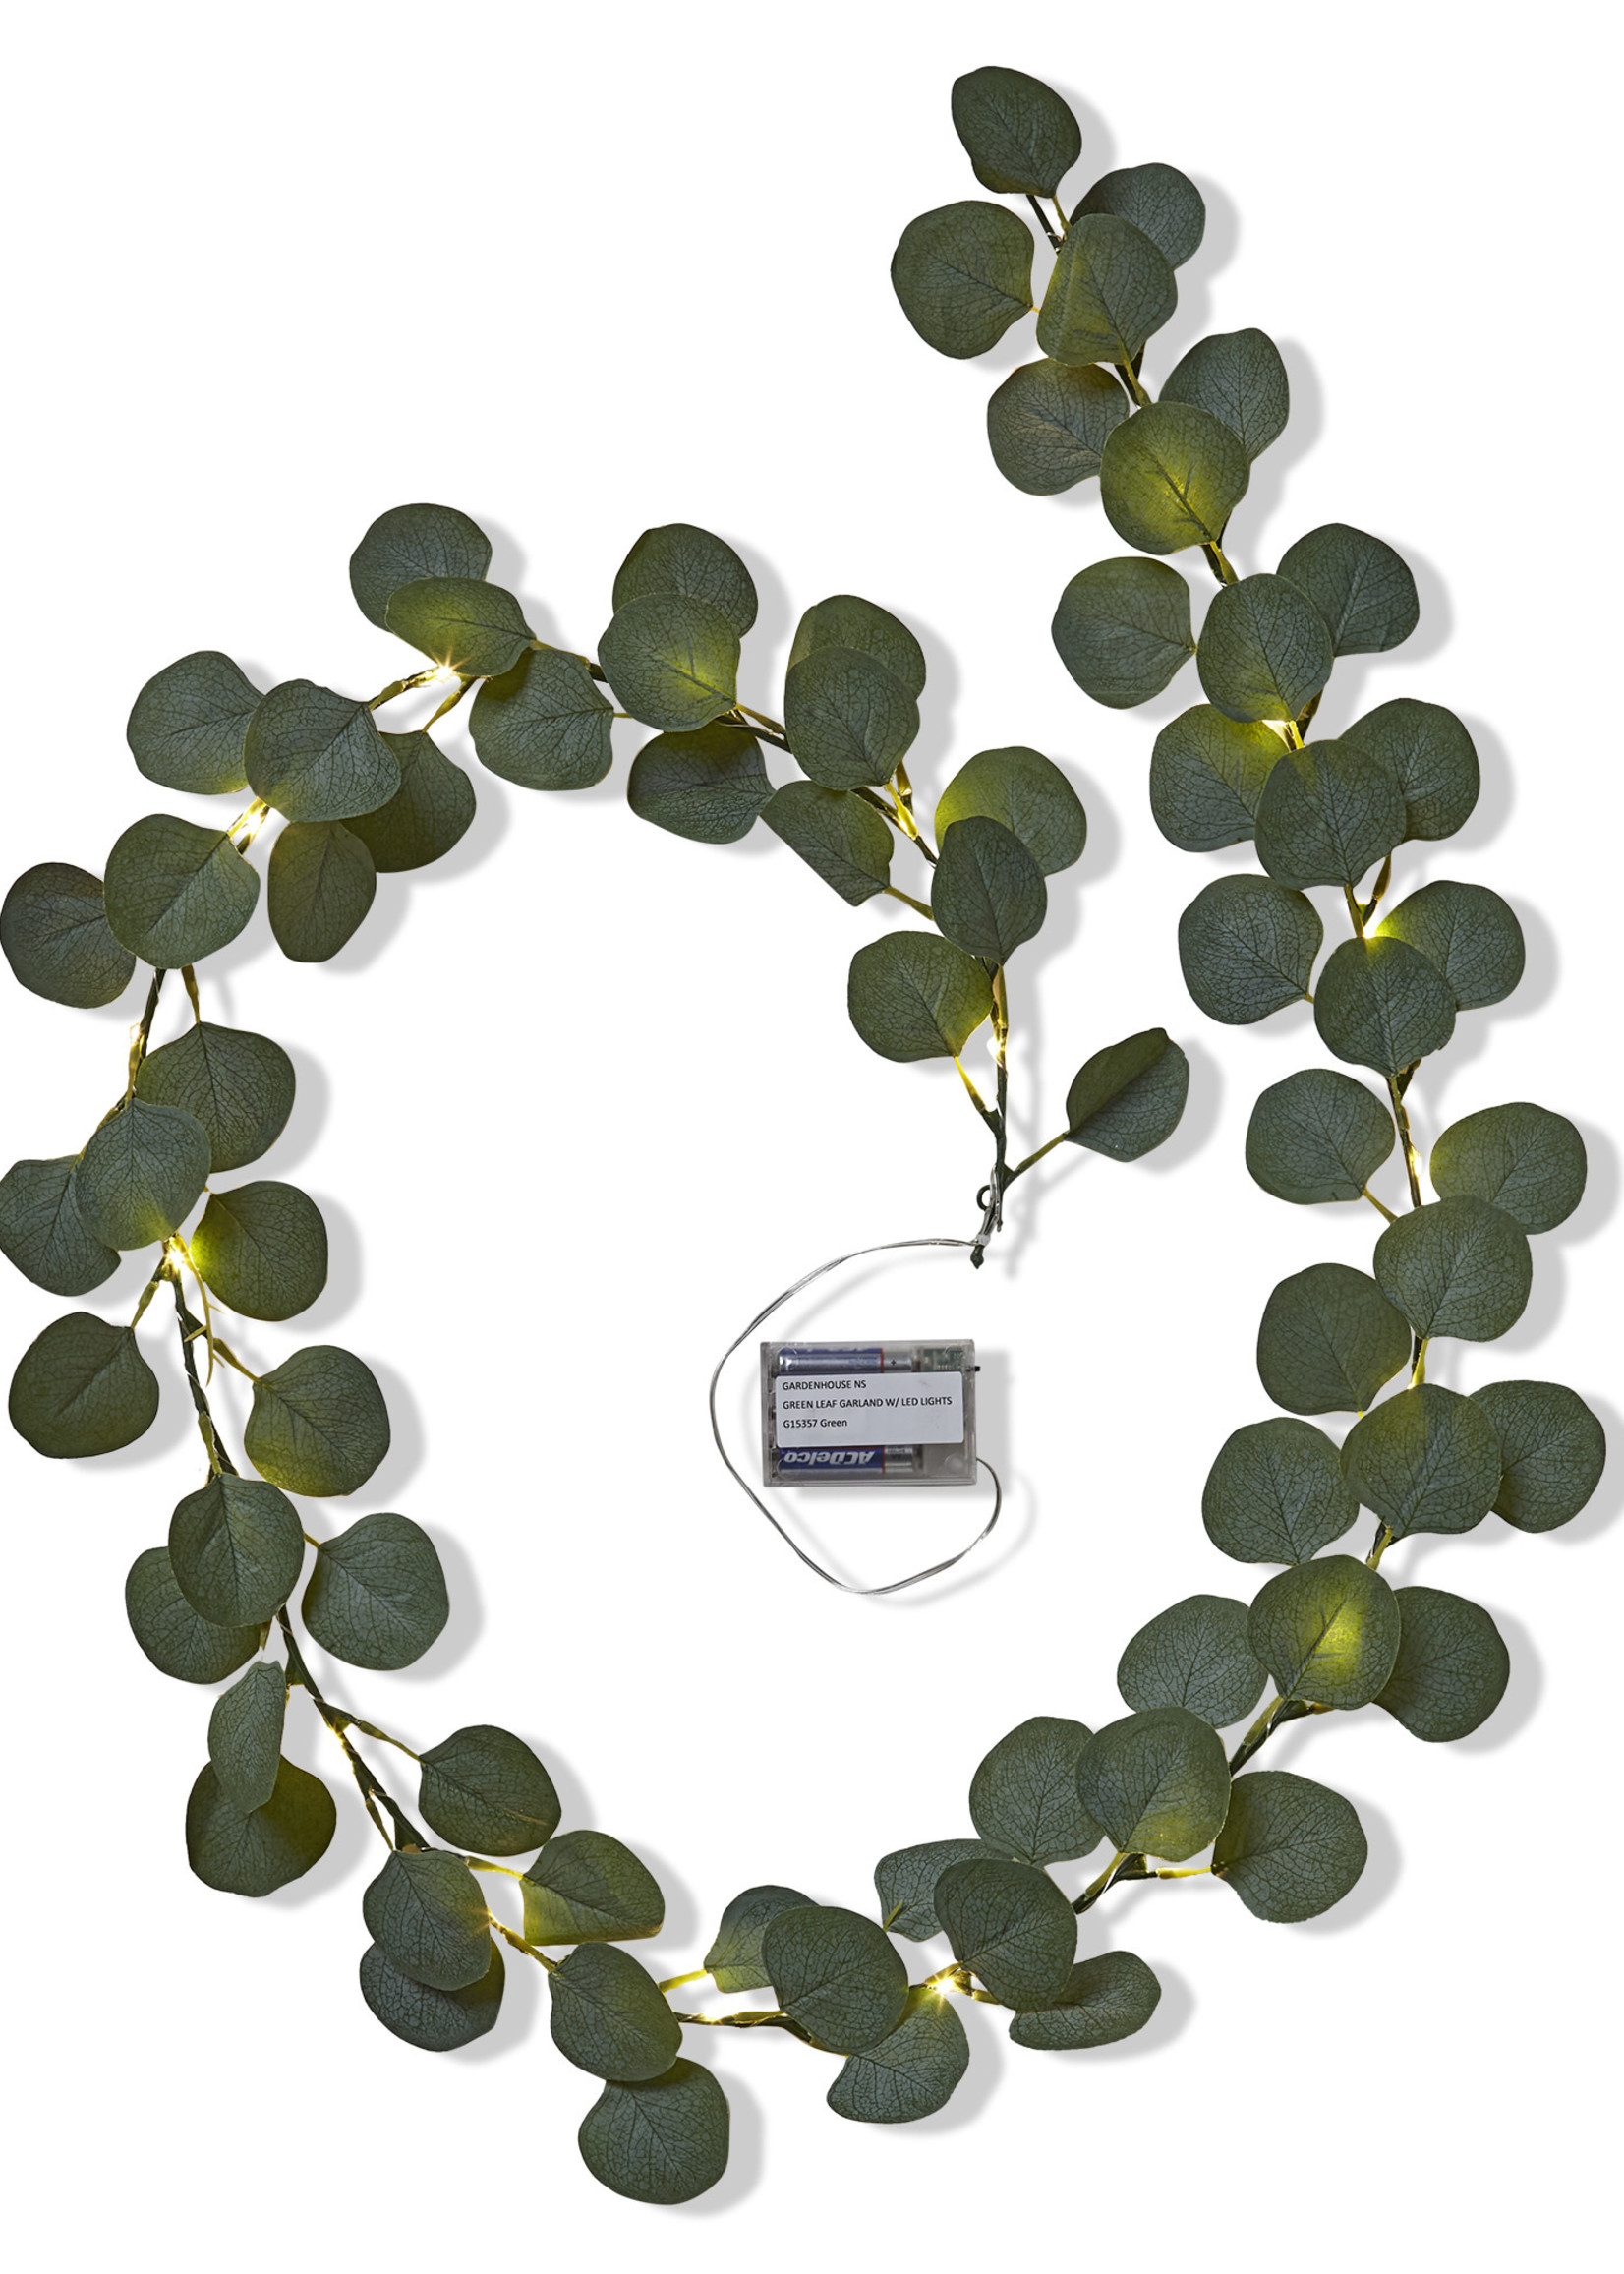 Tag TAG | silver dollar eucalyptus garland with led lights